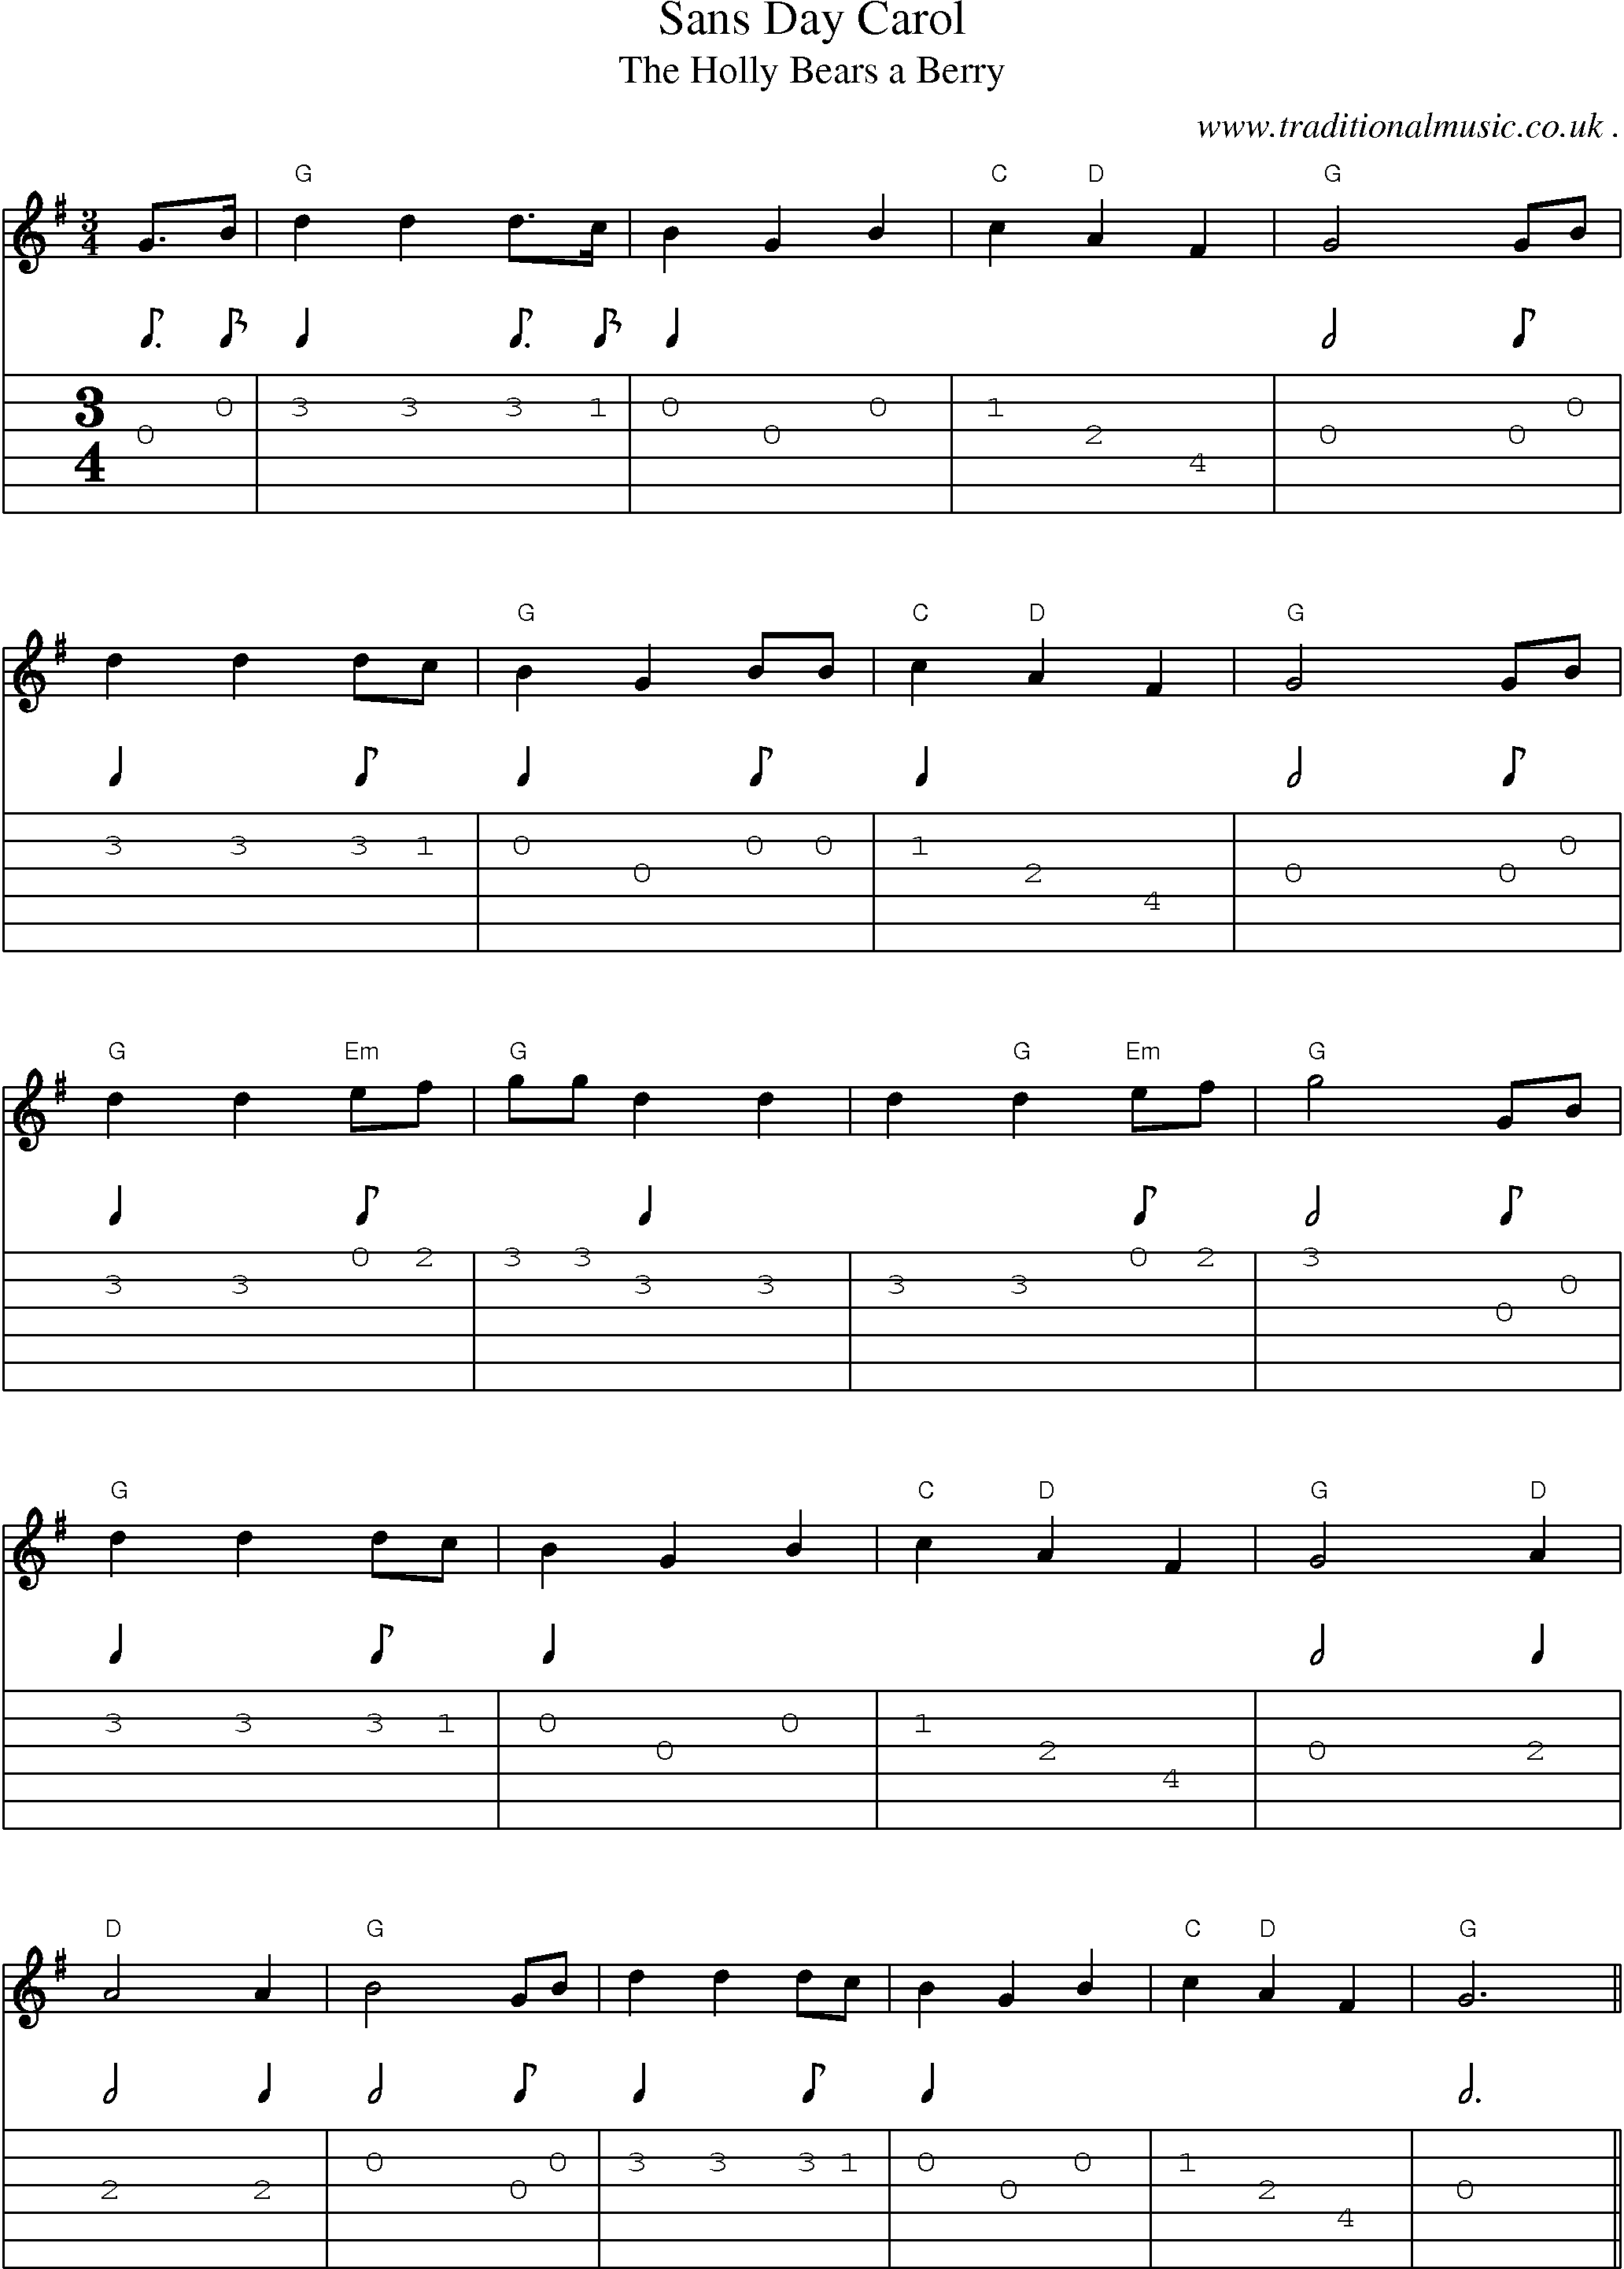 Music Score and Guitar Tabs for Sans Day Carol